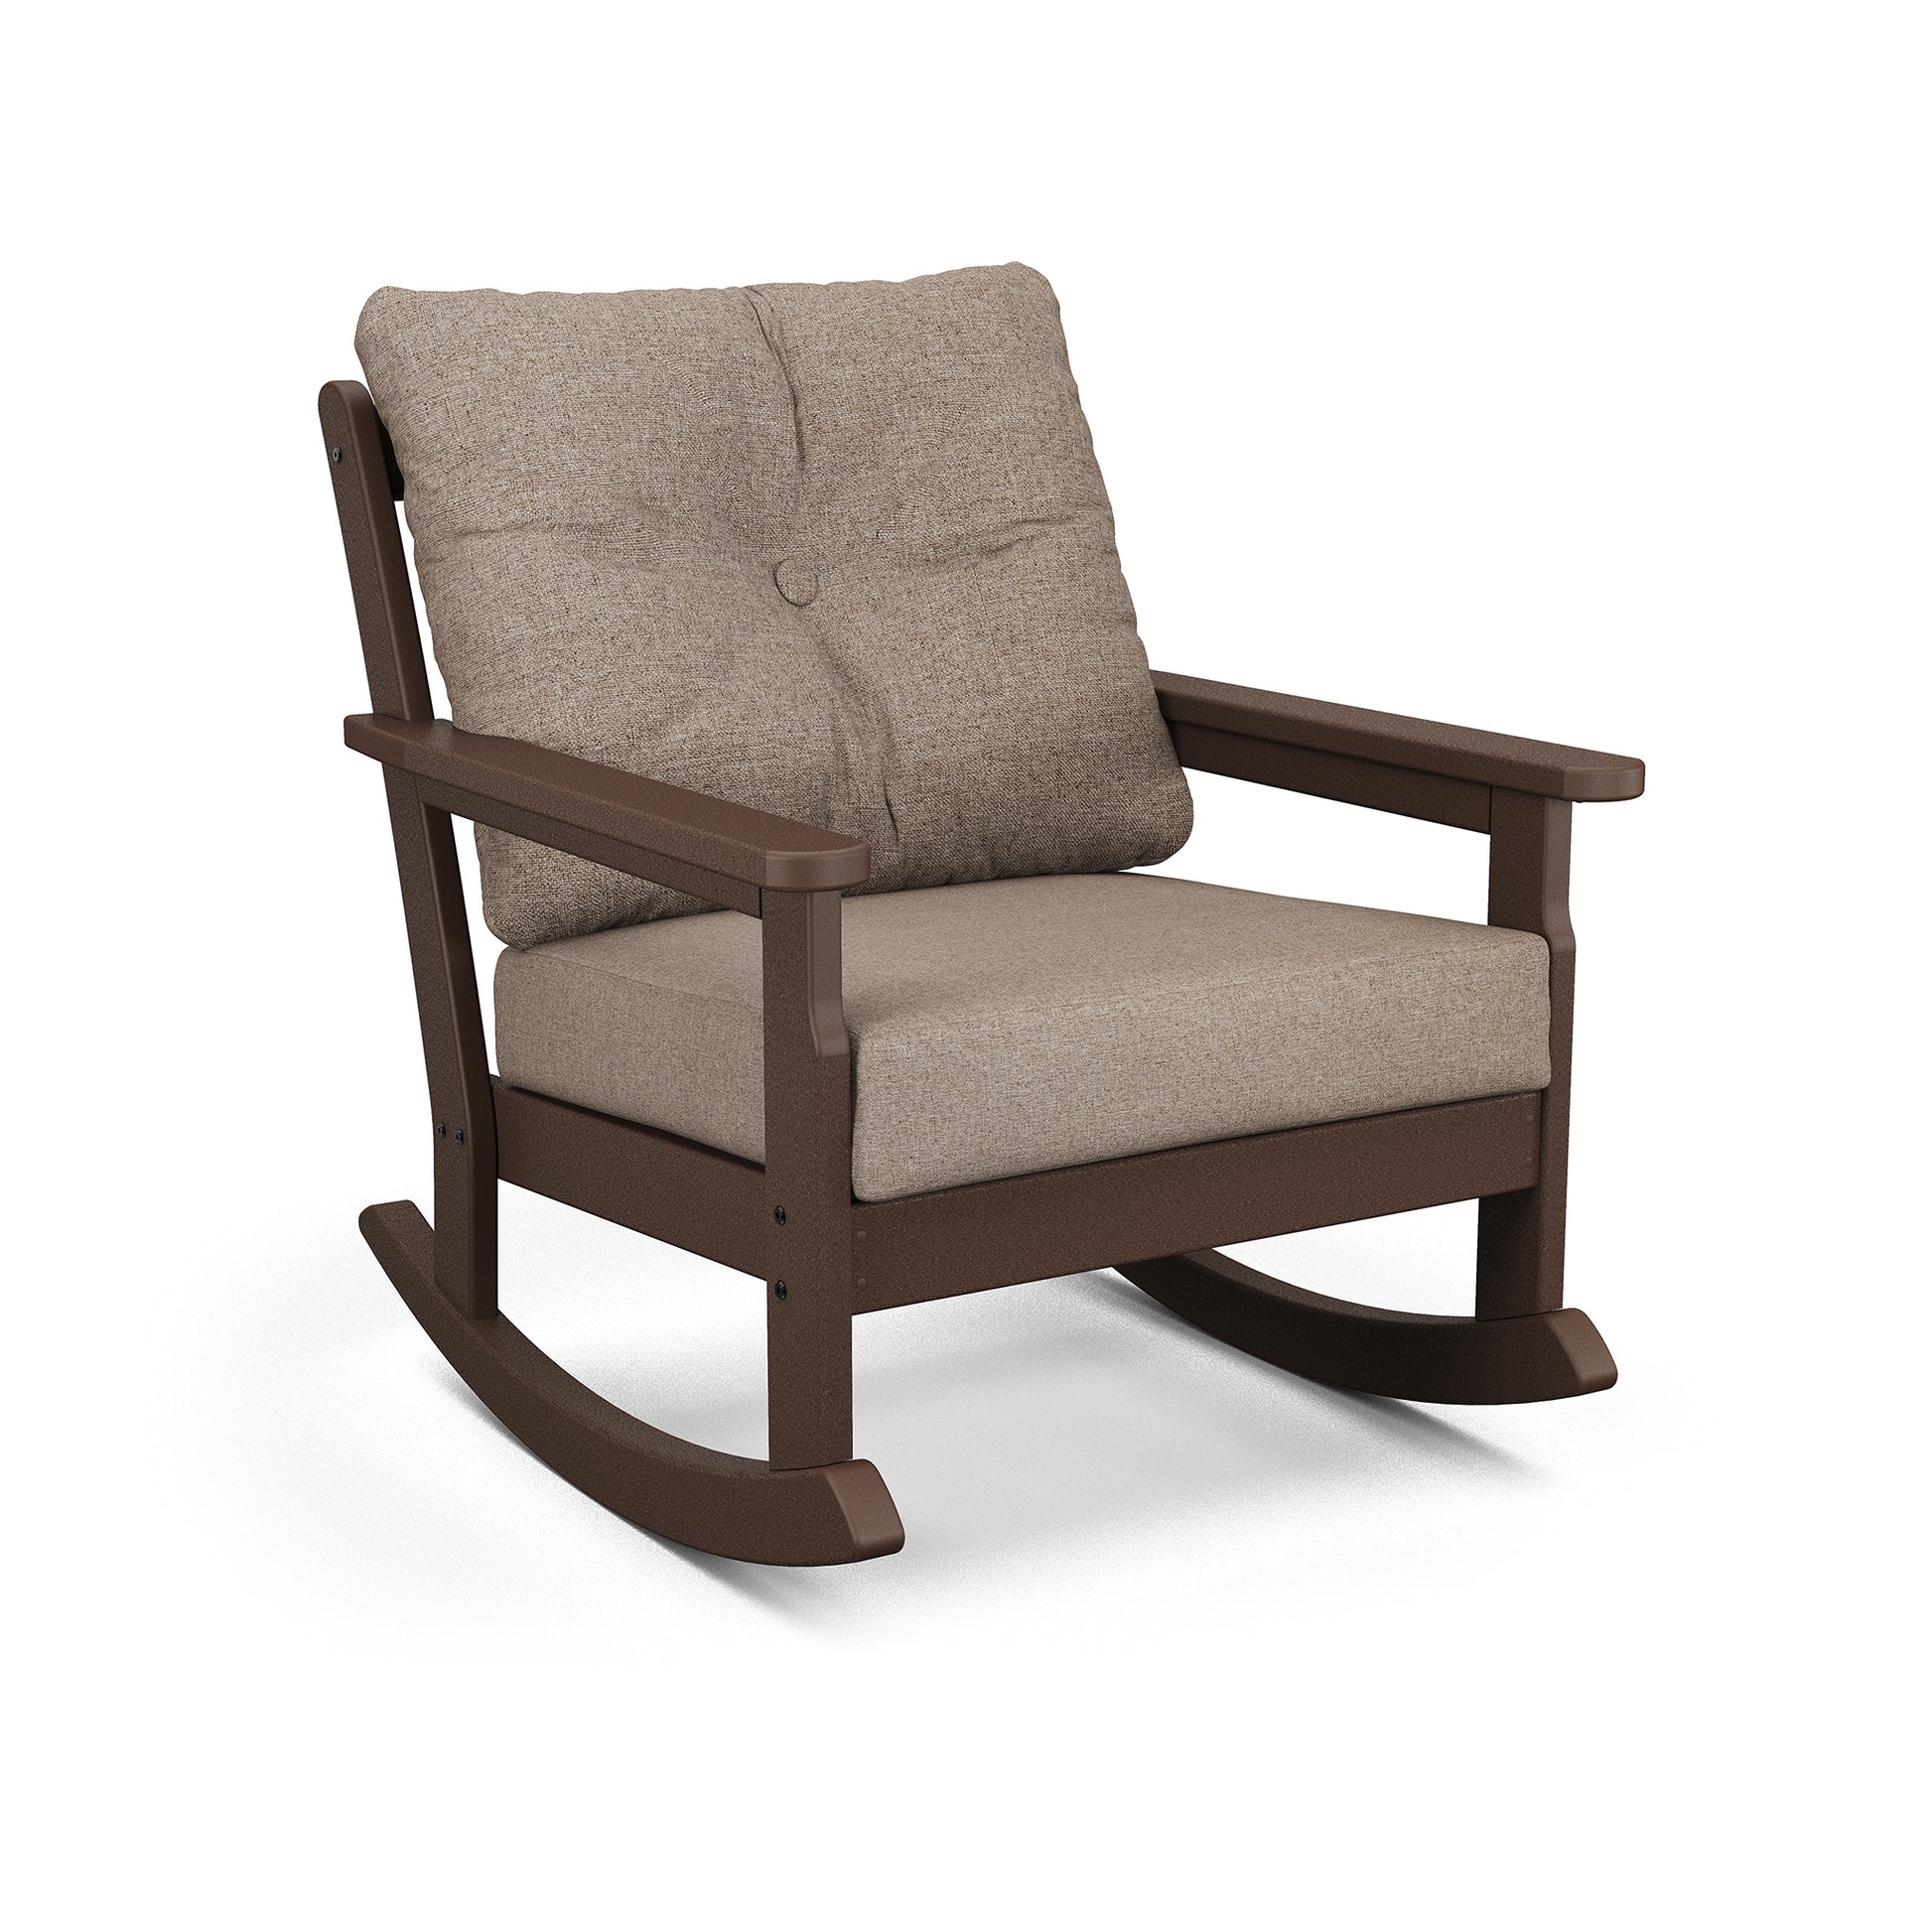 A modern POLYWOOD Vineyard Deep Seating Rocking Chair with a dark brown frame and beige cushions, isolated on a white background. The chair features a simple, contemporary design and is ideal for outdoor furniture maintenance.